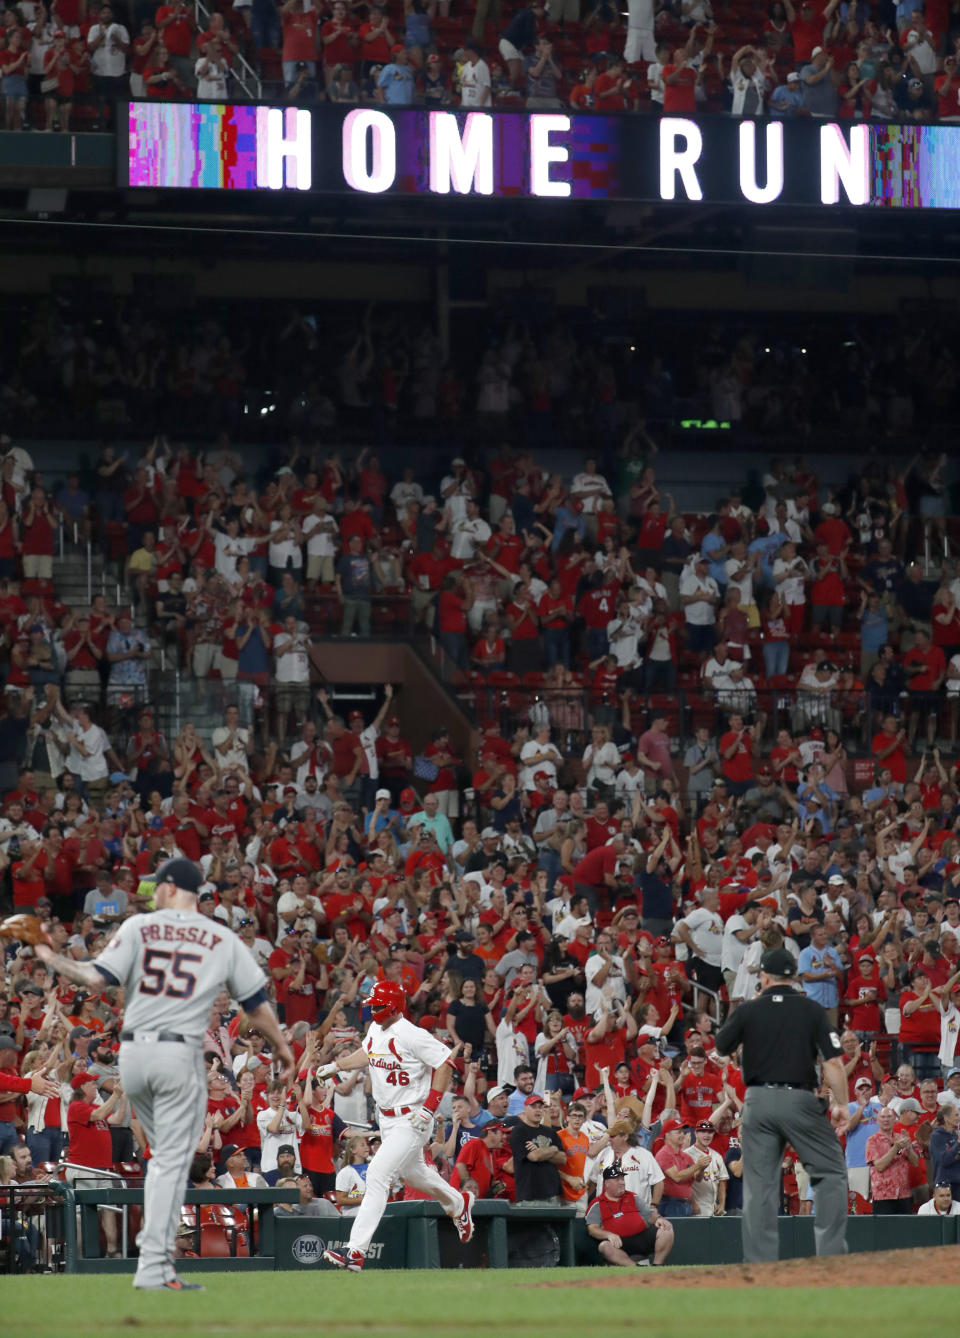 St. Louis Cardinals' Paul Goldschmidt (46) rounds the bases after hitting a three-run home run off Houston Astros relief pitcher Ryan Pressly (55) during the eighth inning of a baseball game Friday, July 26, 2019, in St. Louis. (AP Photo/Jeff Roberson)